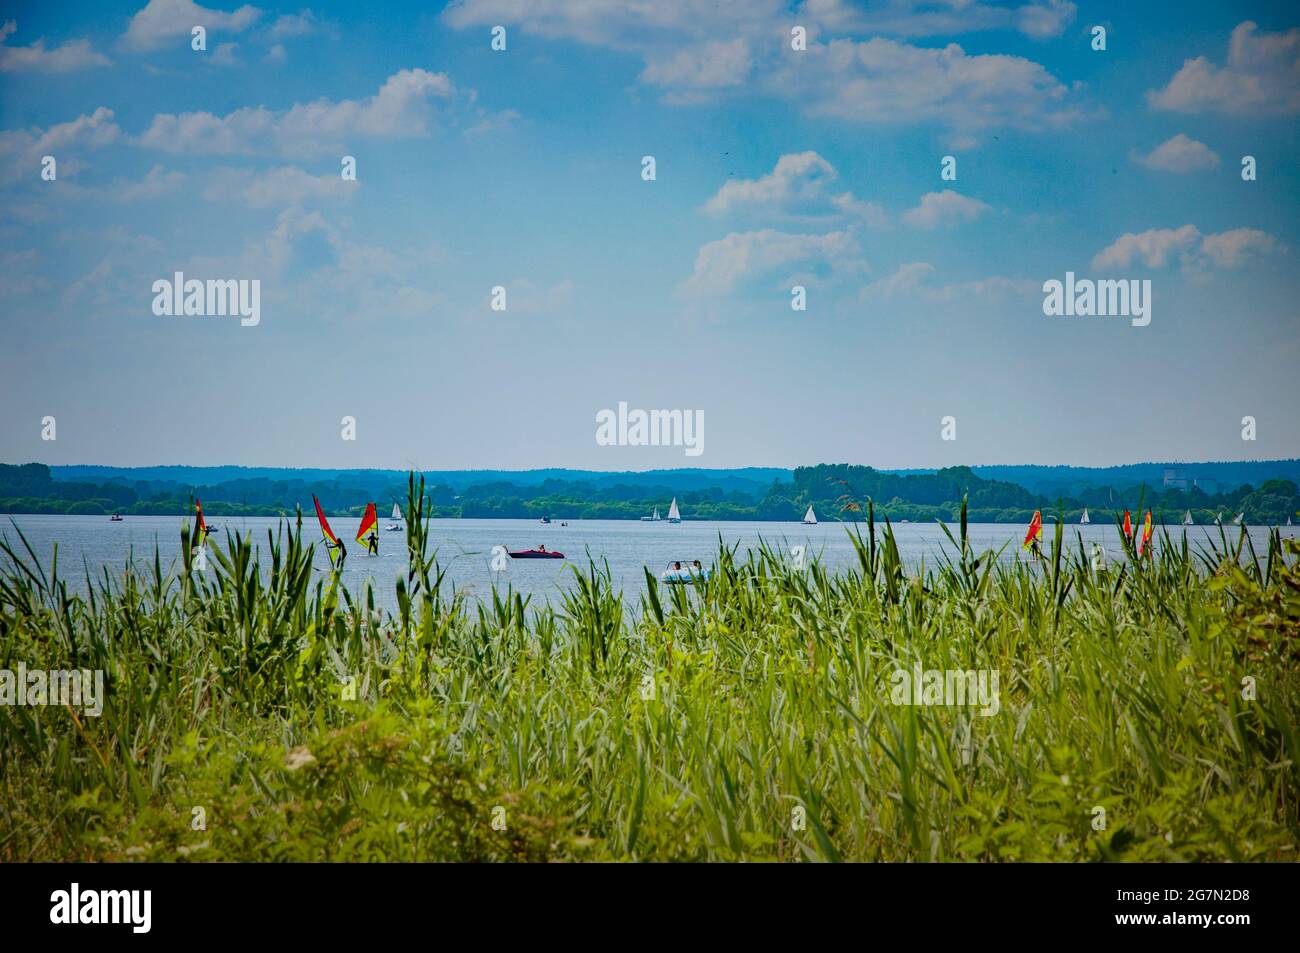 BOHMTE, GERMANY. JUNE 27, 2021 Dammer Natural Park. Lake view, boats, yachts, pier people resting on the beach Stock Photo